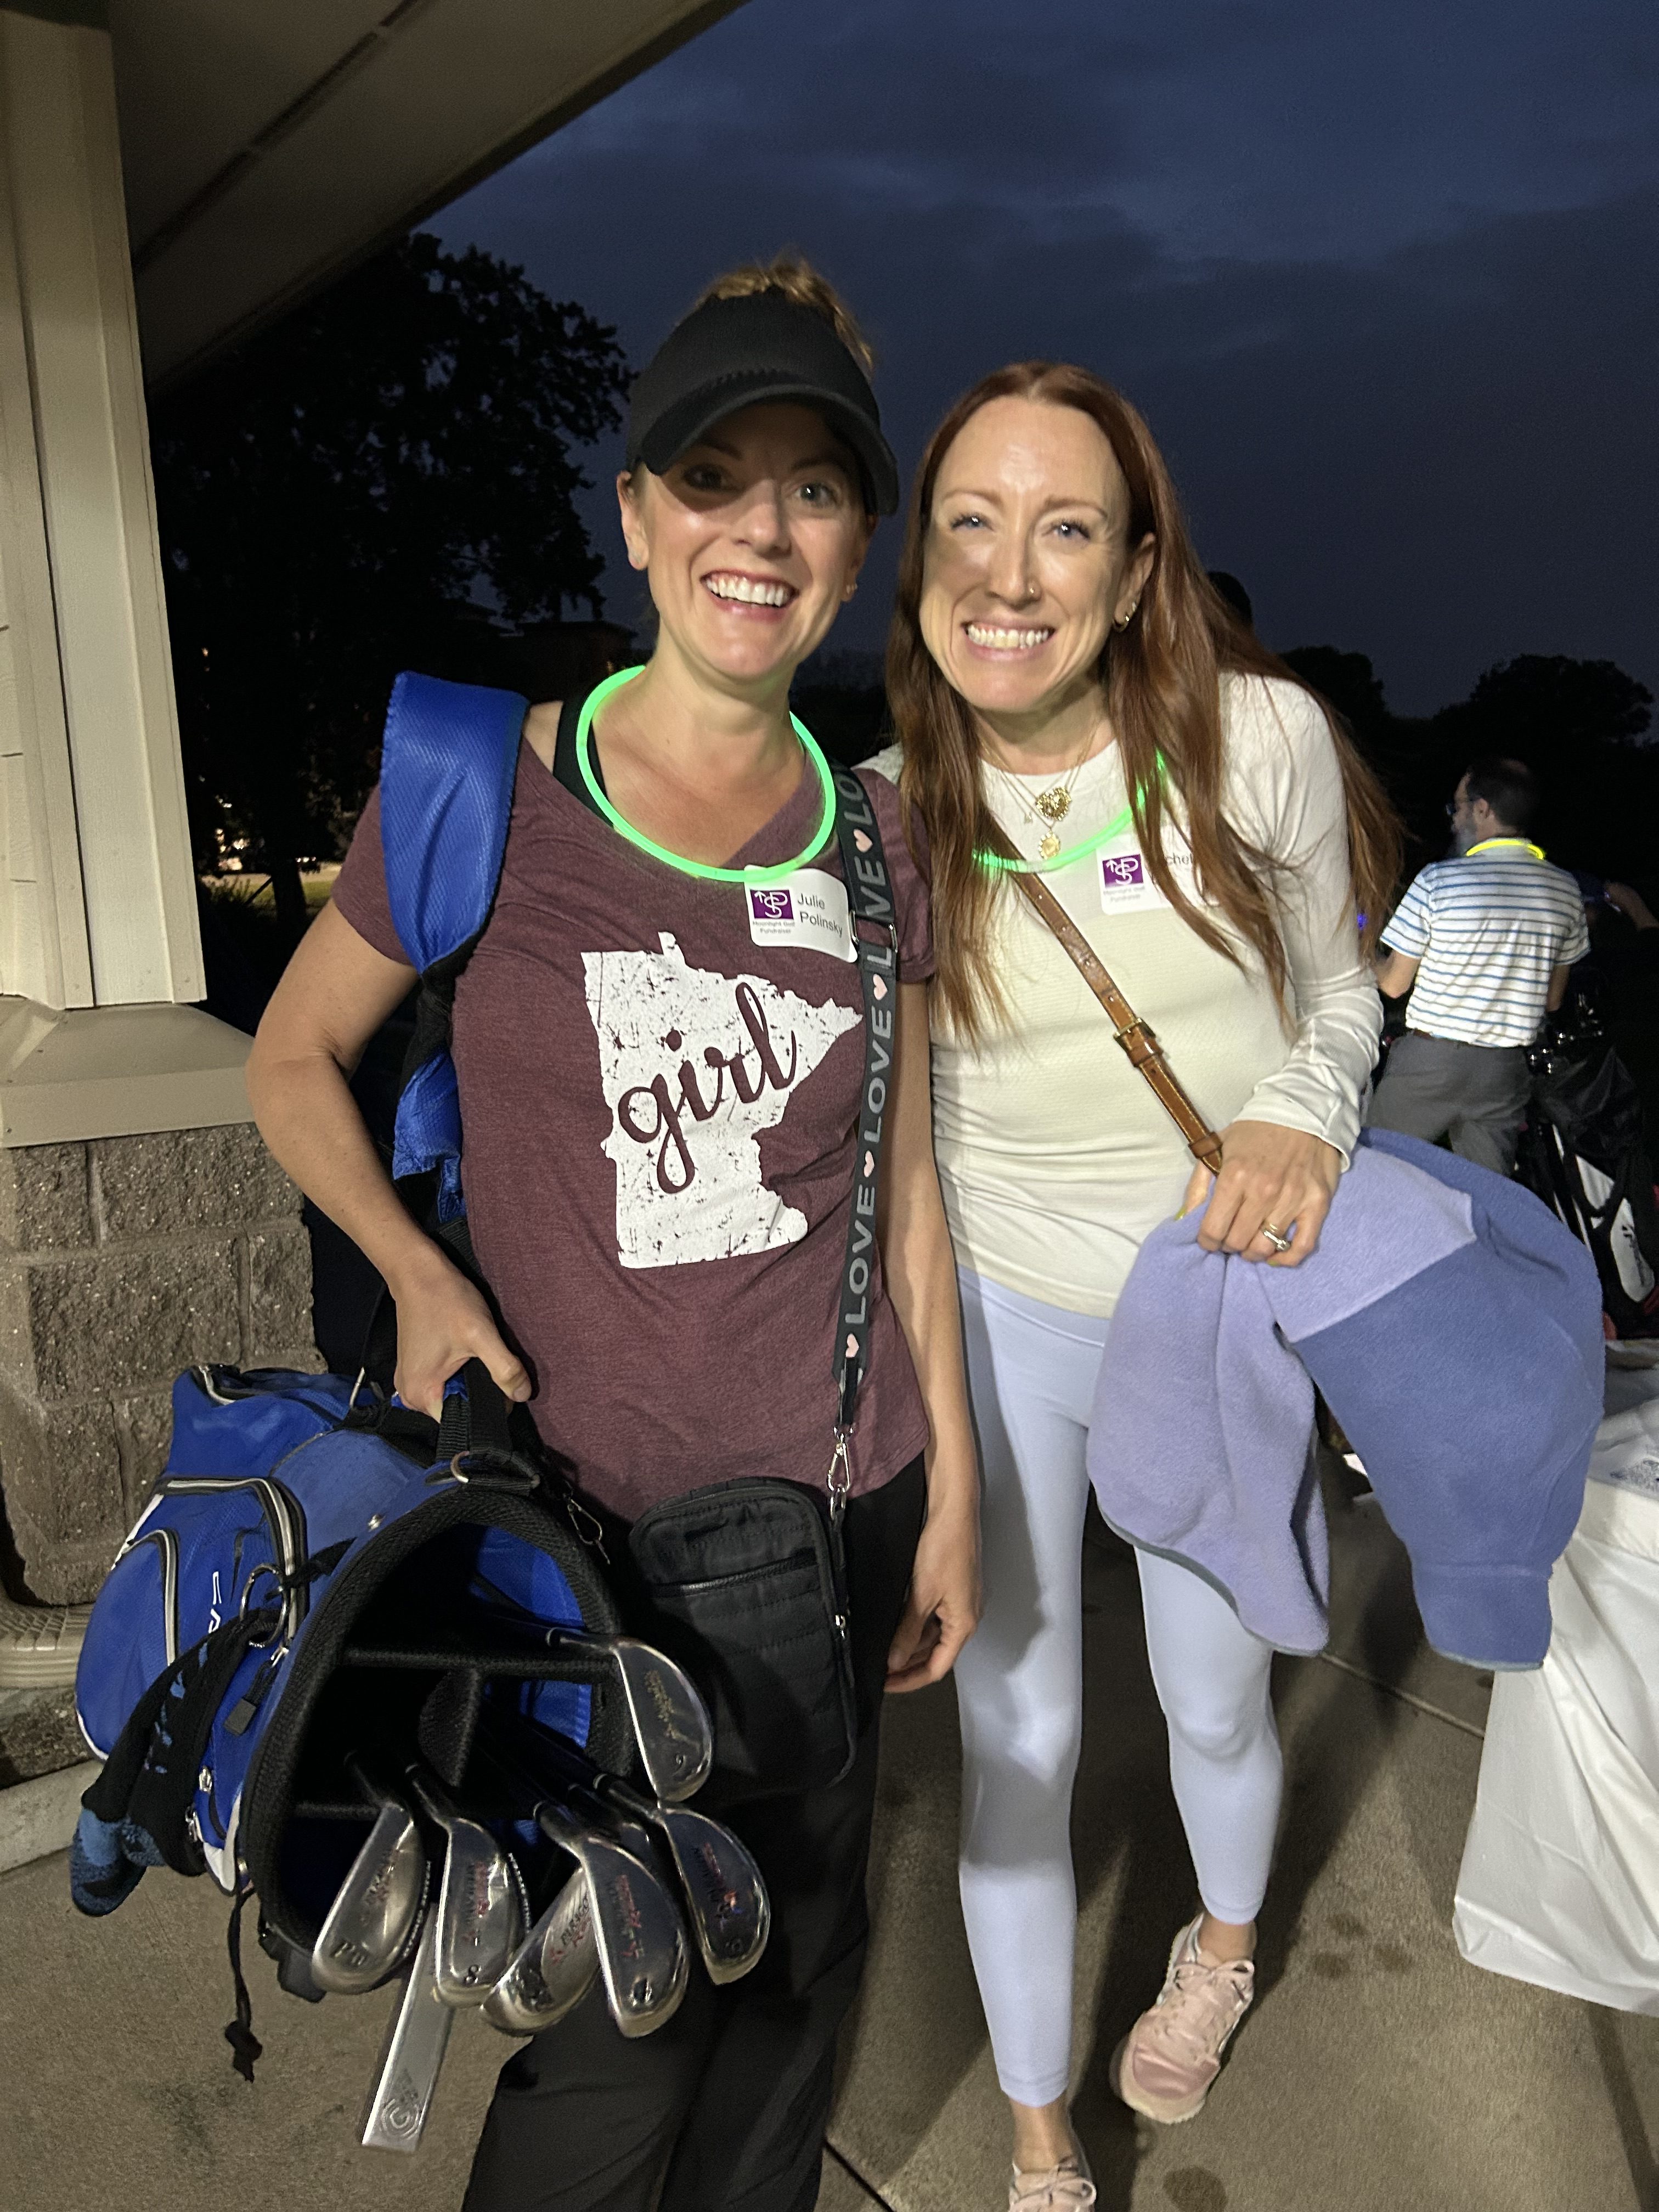 Two women smiling and holding golf bags